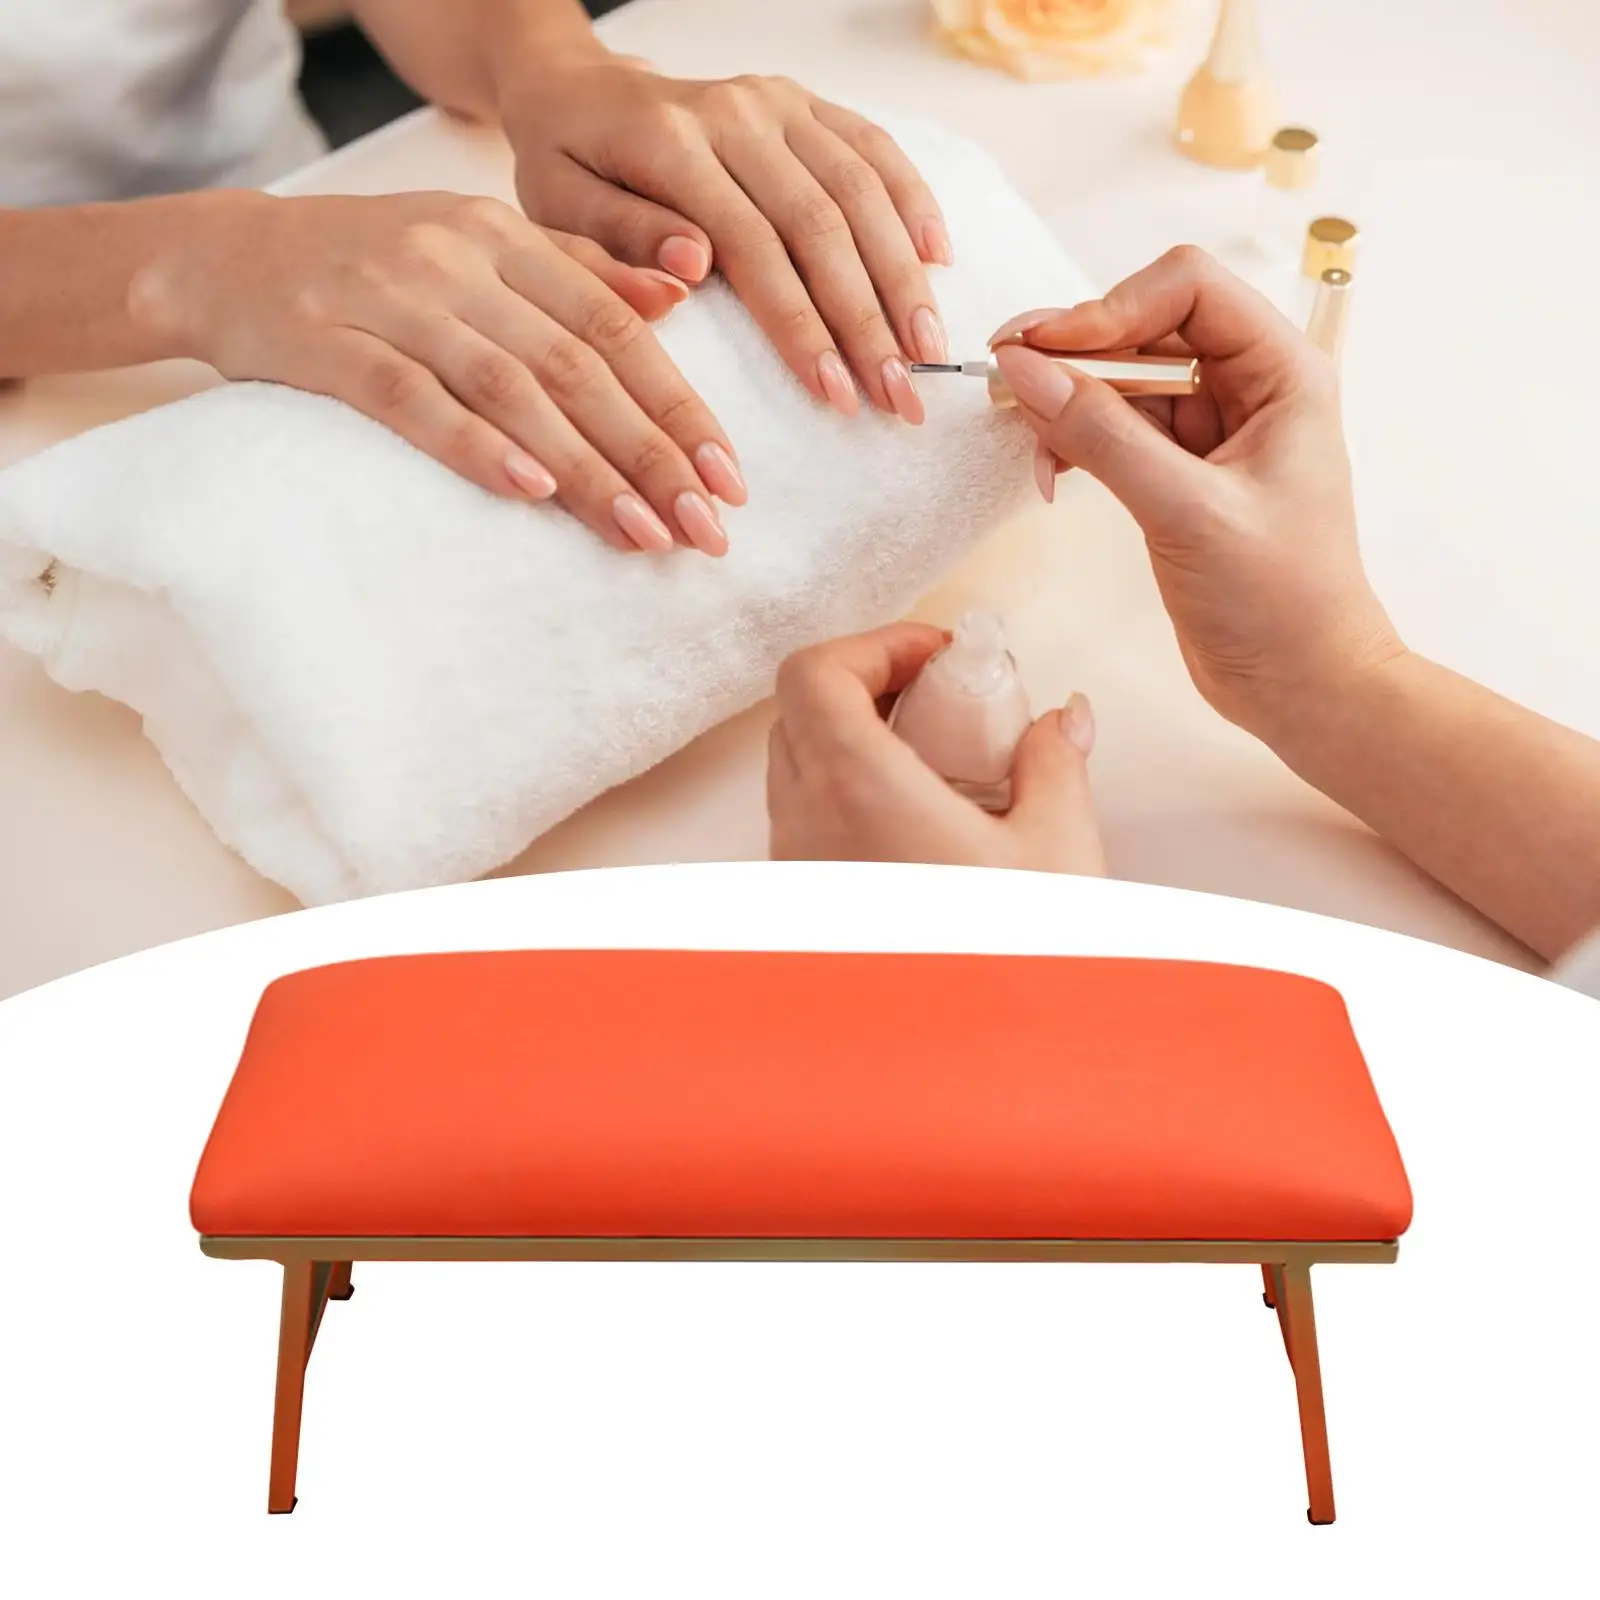 Nail Arm Rest Mat Comfortable Table Premium Manicure Hand Pillow Manicure Tool Accessory Hand Nail Art Nail Technician Use